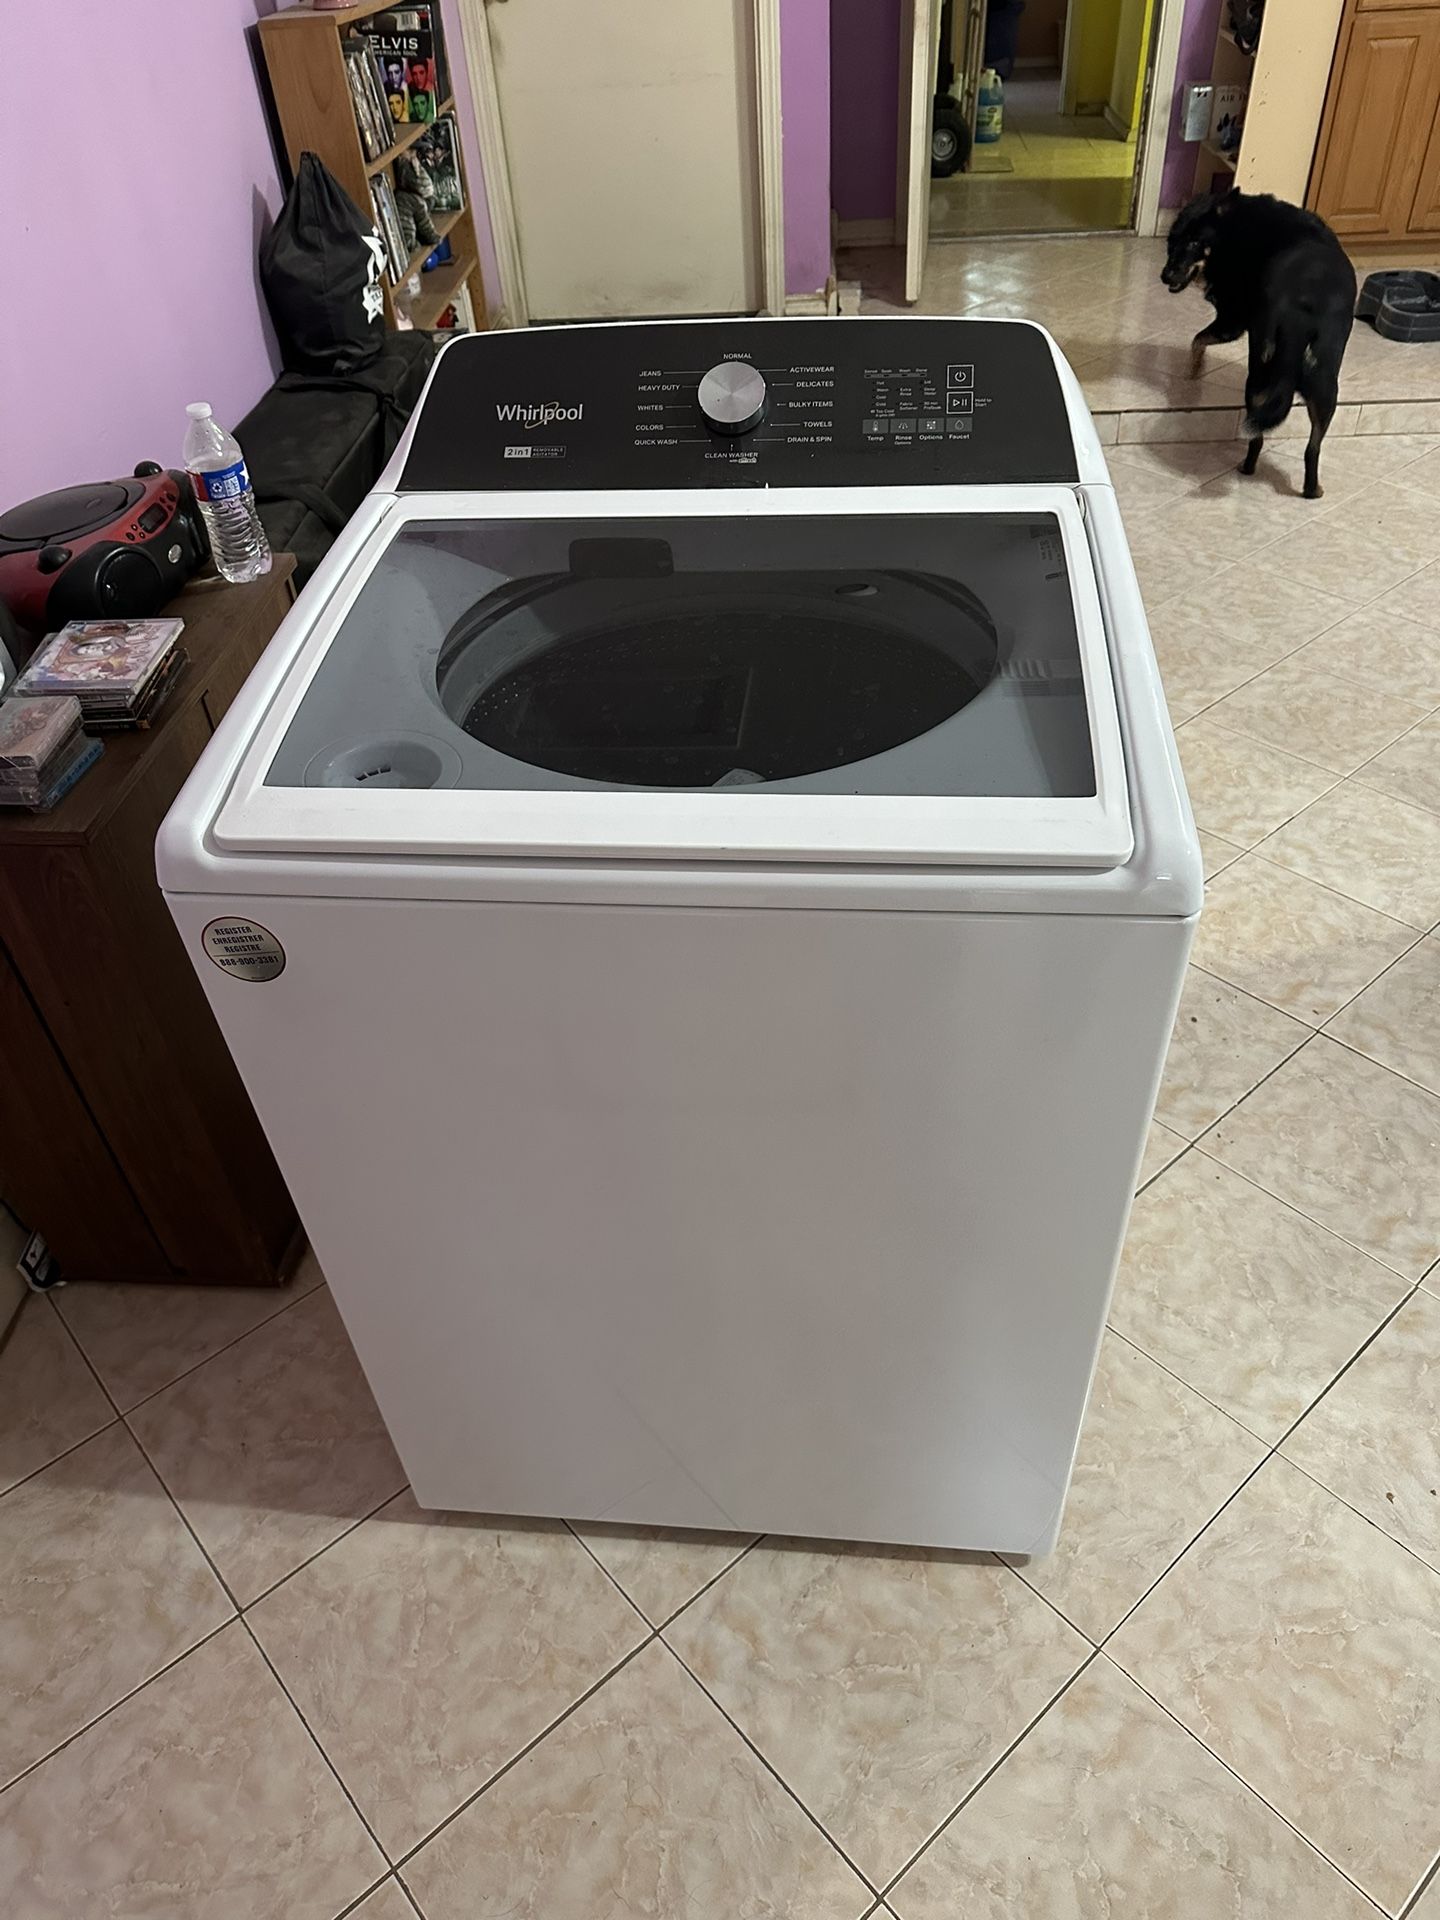 Whirlpool 2 In 1 Top Loader Washing Machine (for parts); Might Be Repairable